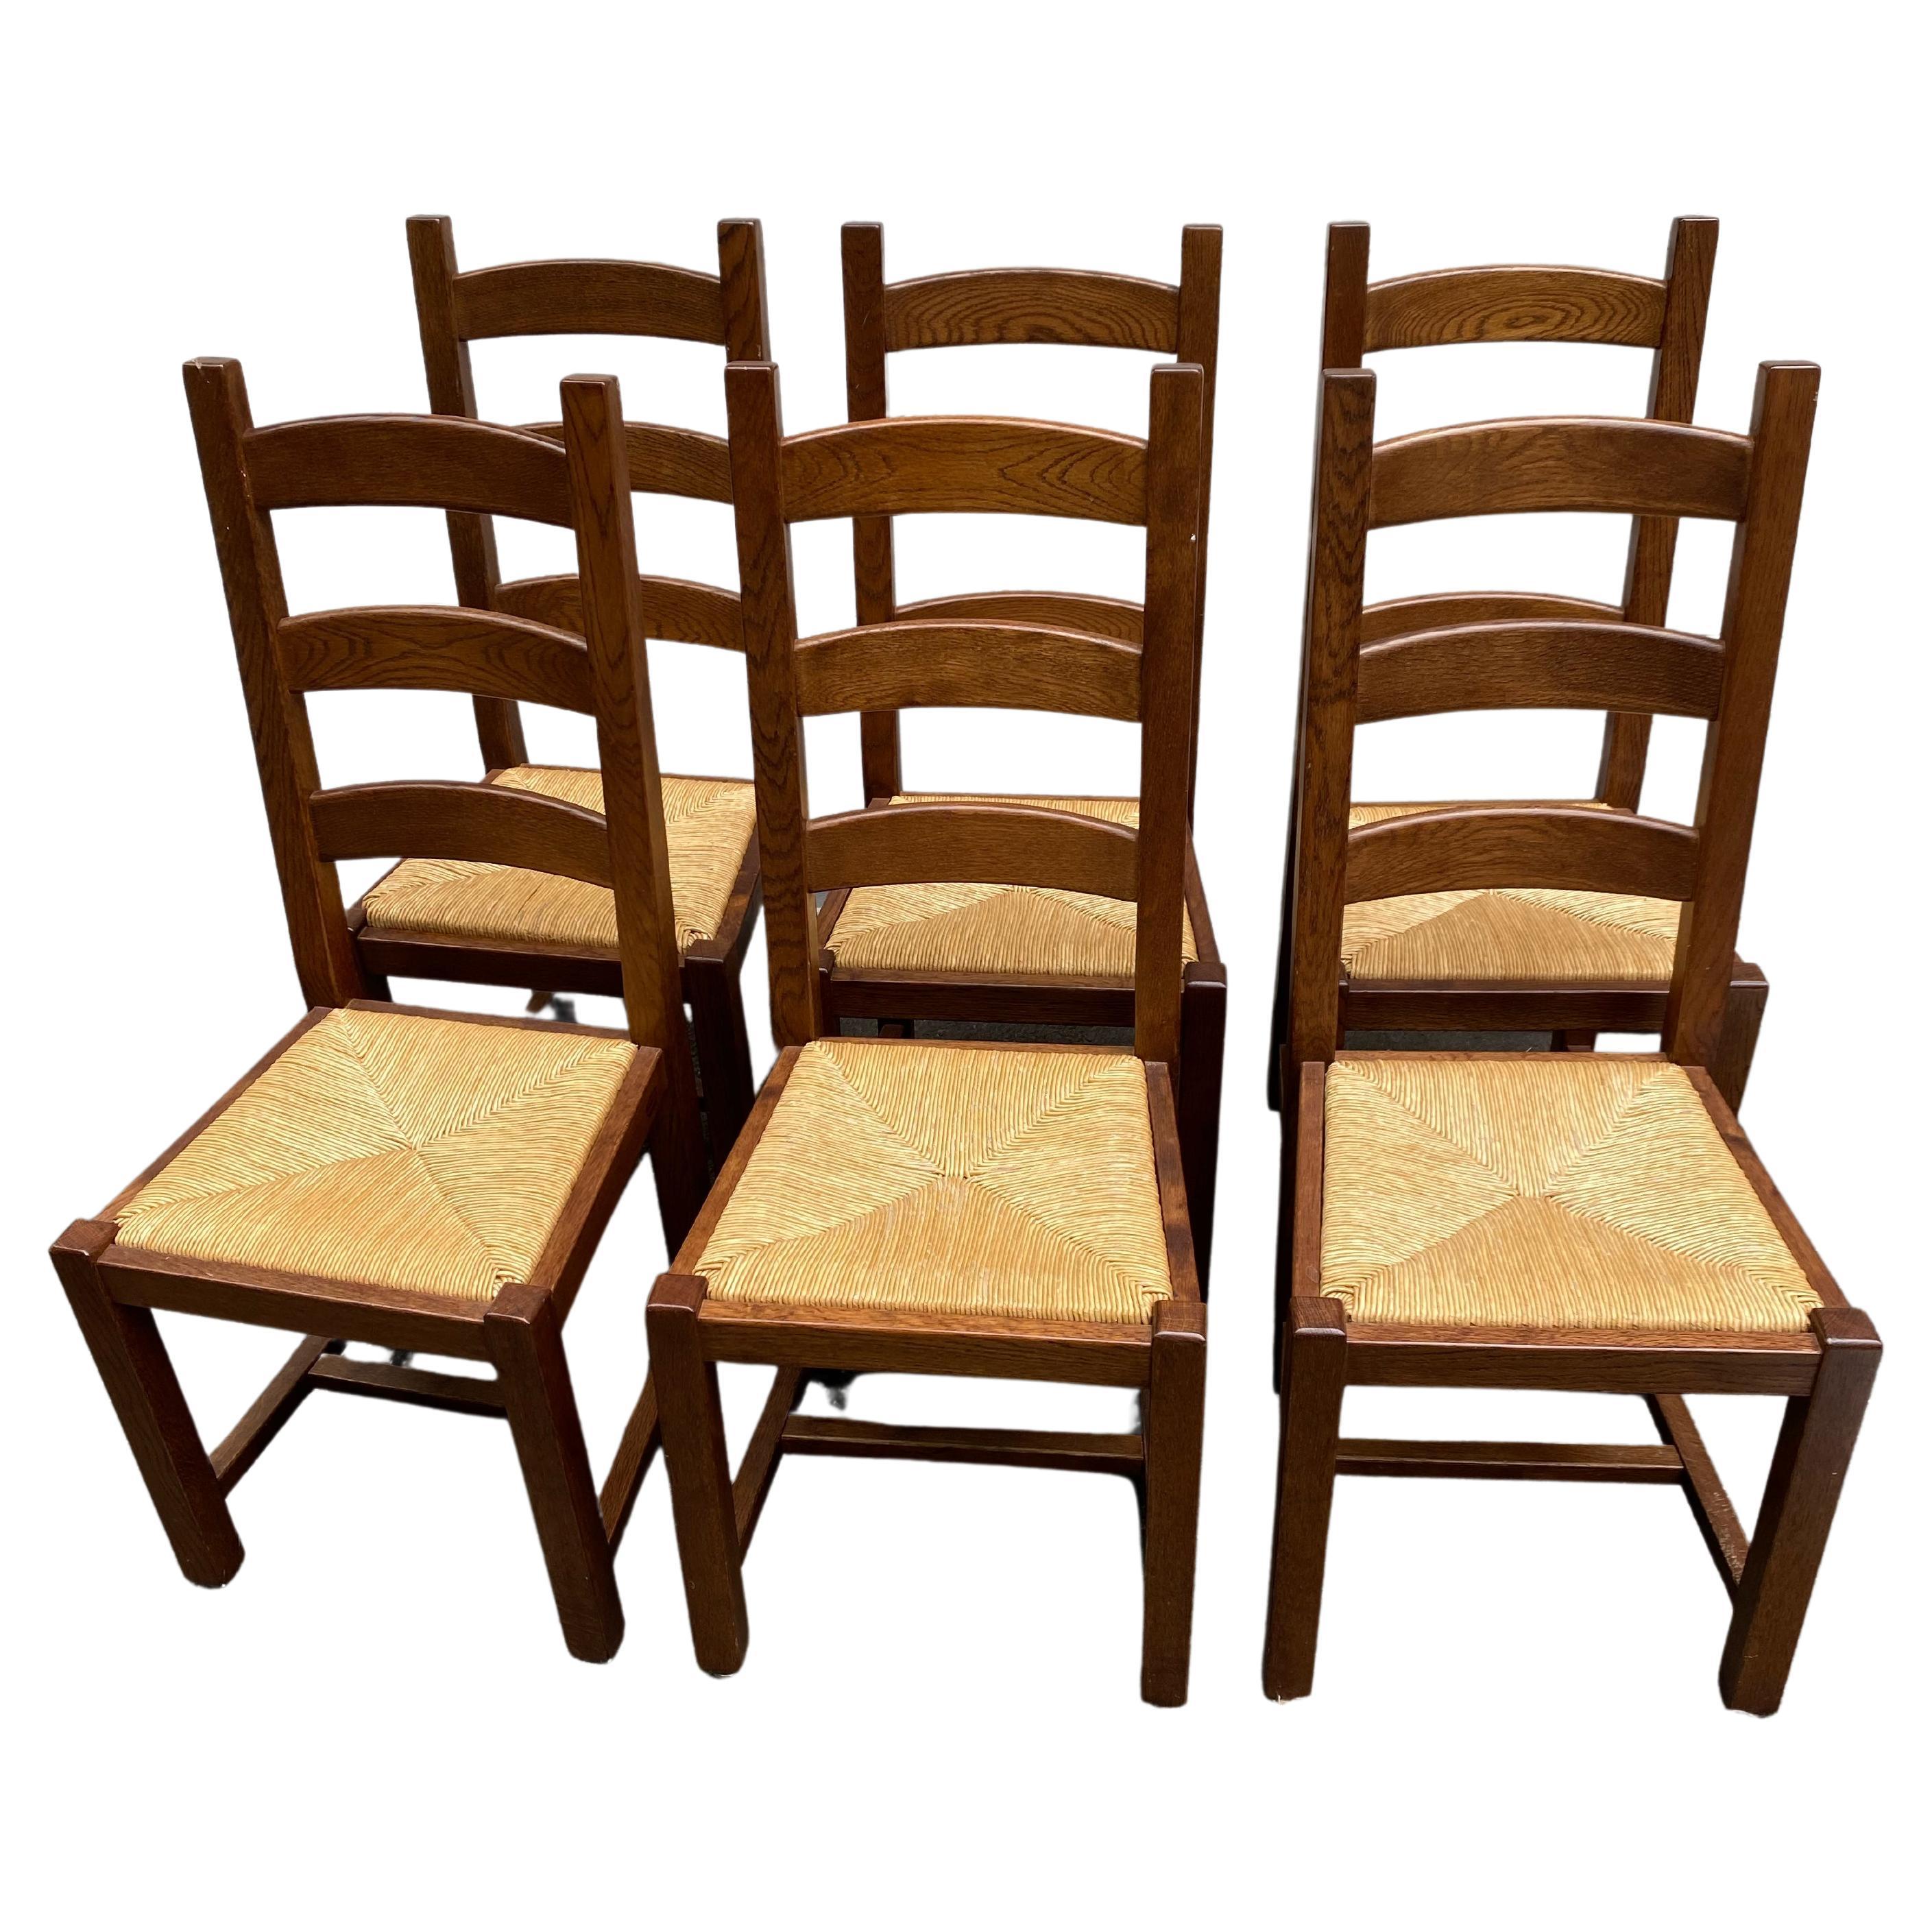 Set of 6 Hand made Italian Ladder Back Dining Chairs with Rush Seats